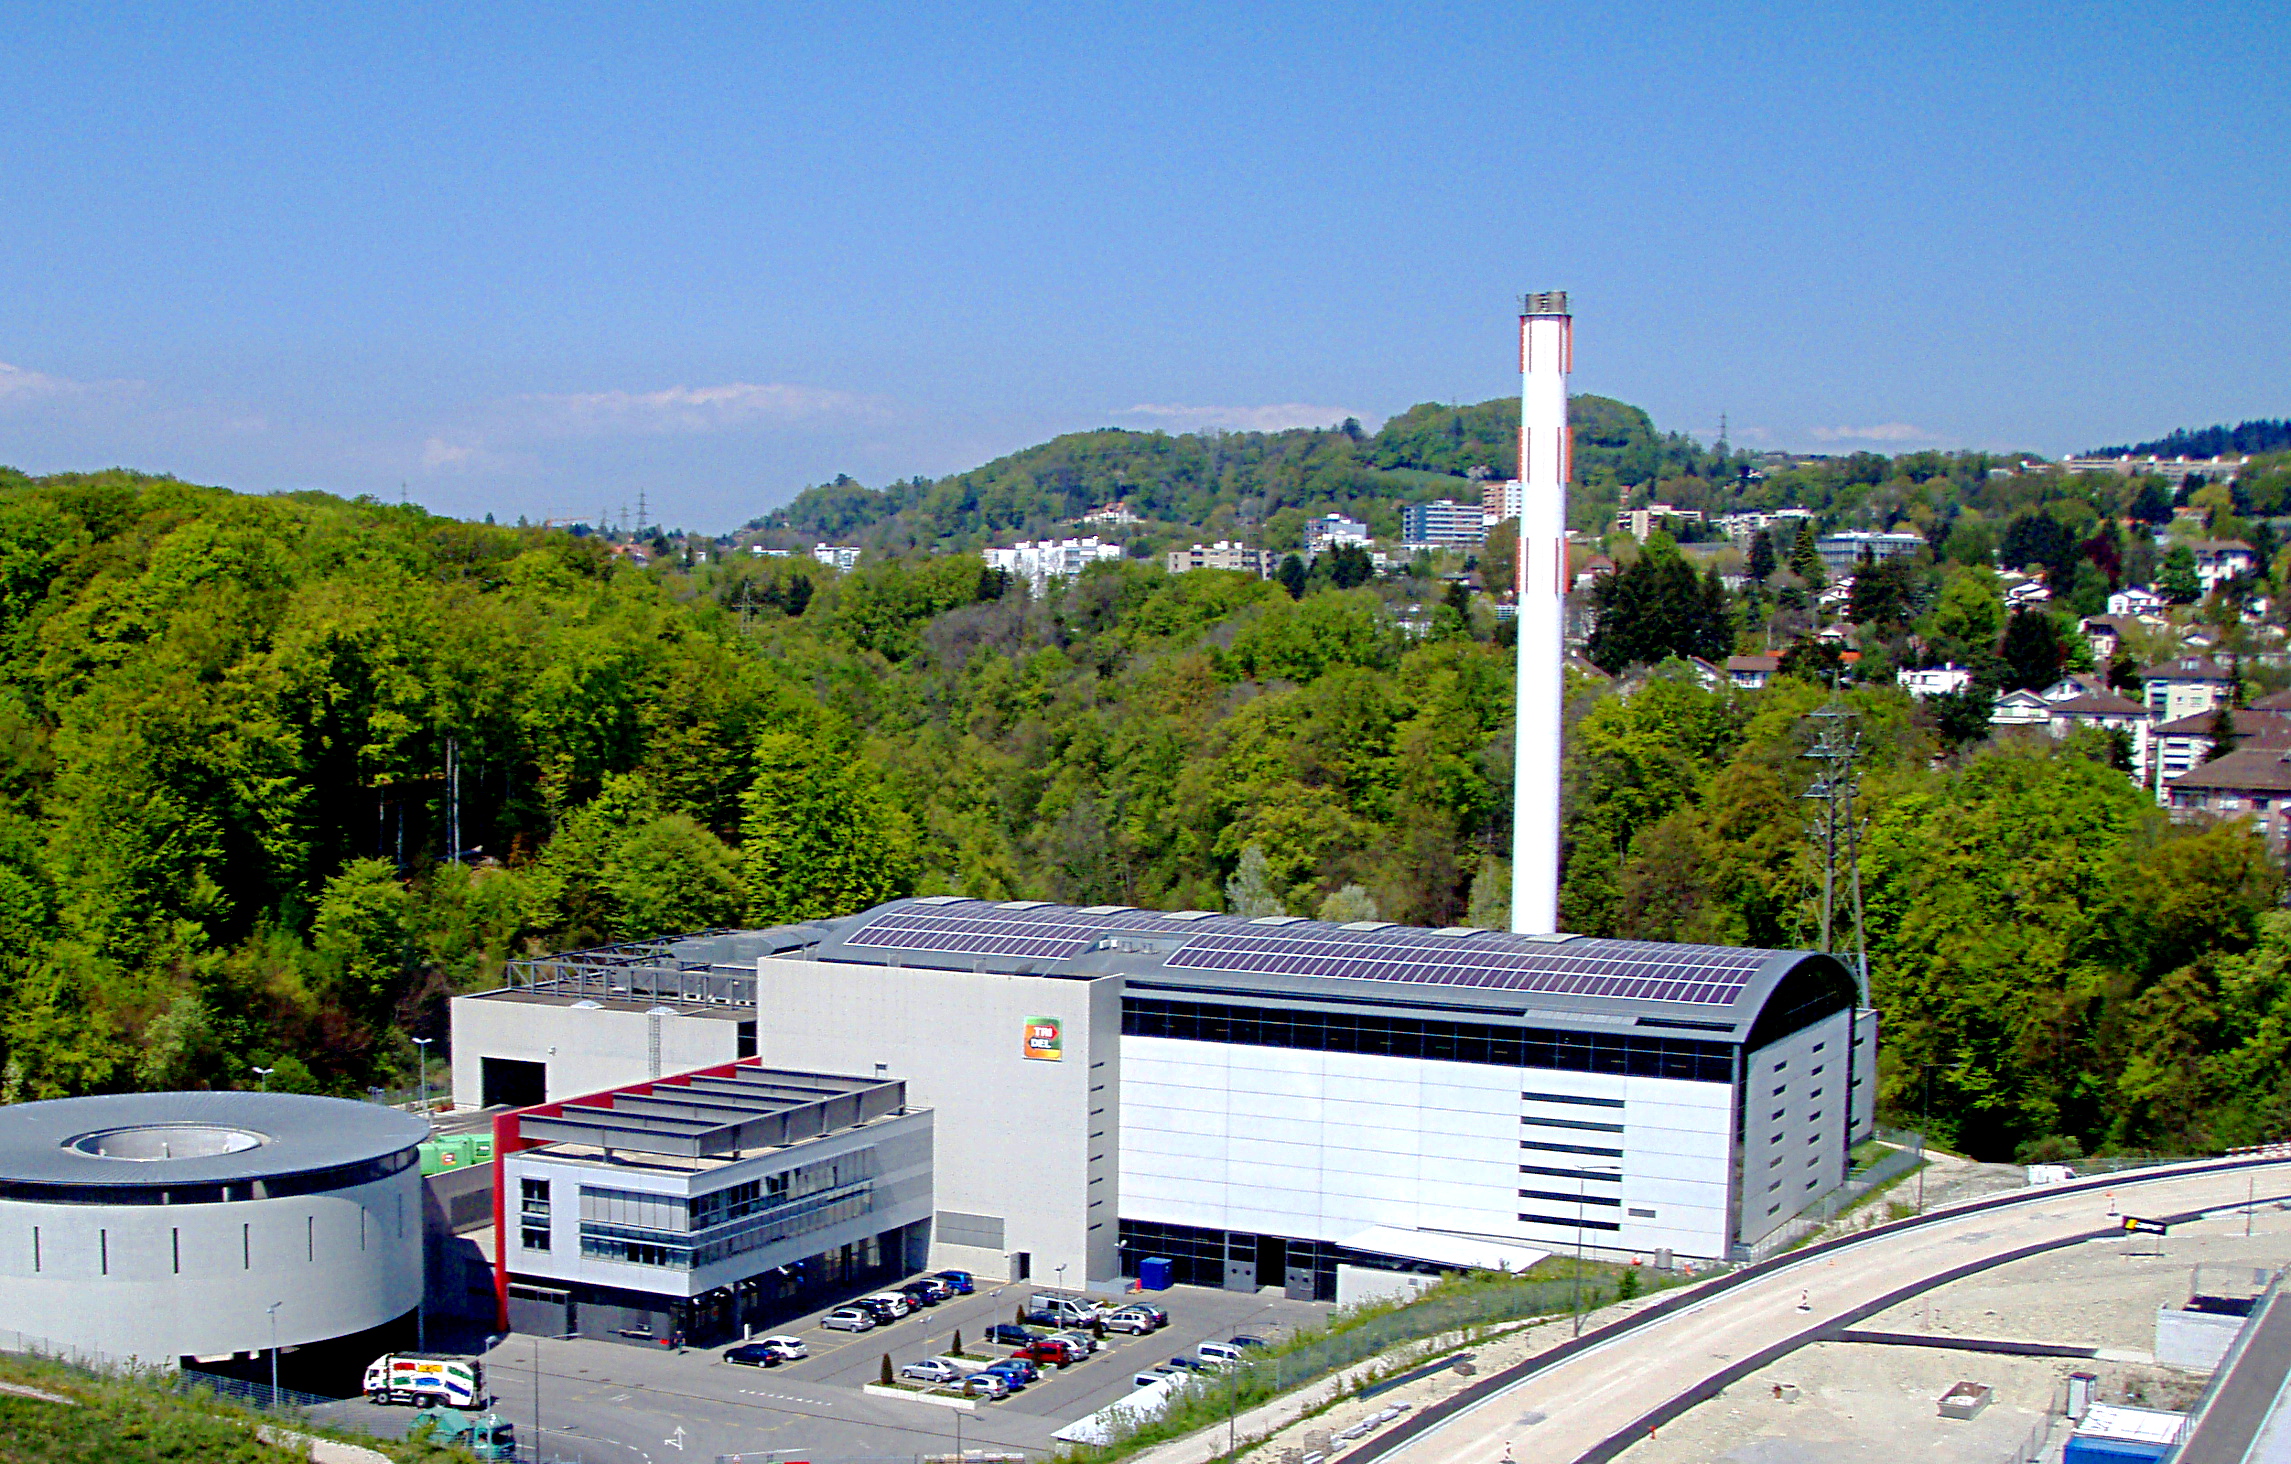 Image of the waste incinerator in Lausanne known as 